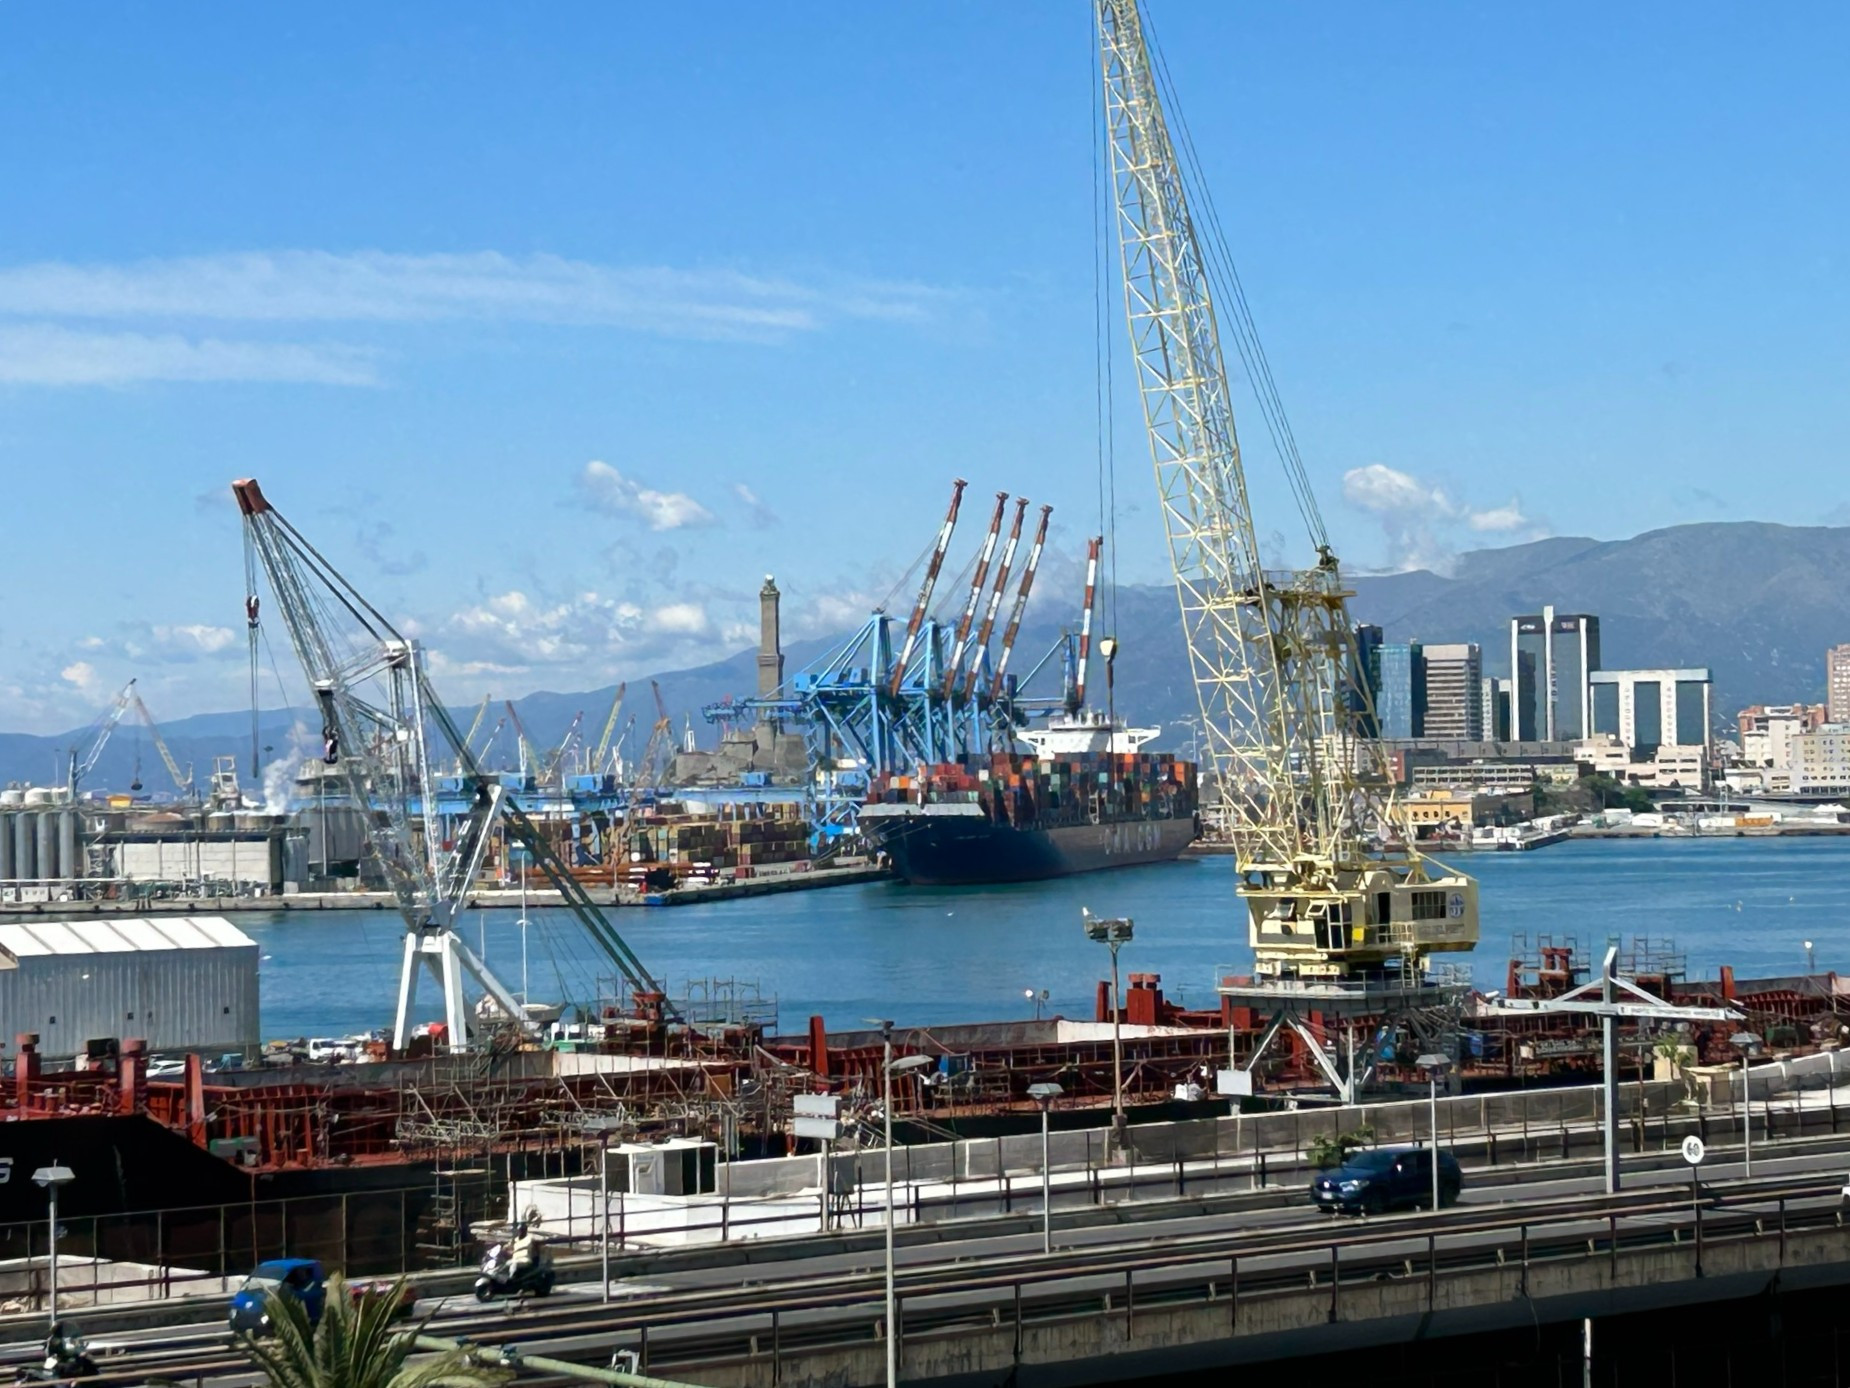 wide view of the port of Genoa with ships and cranes